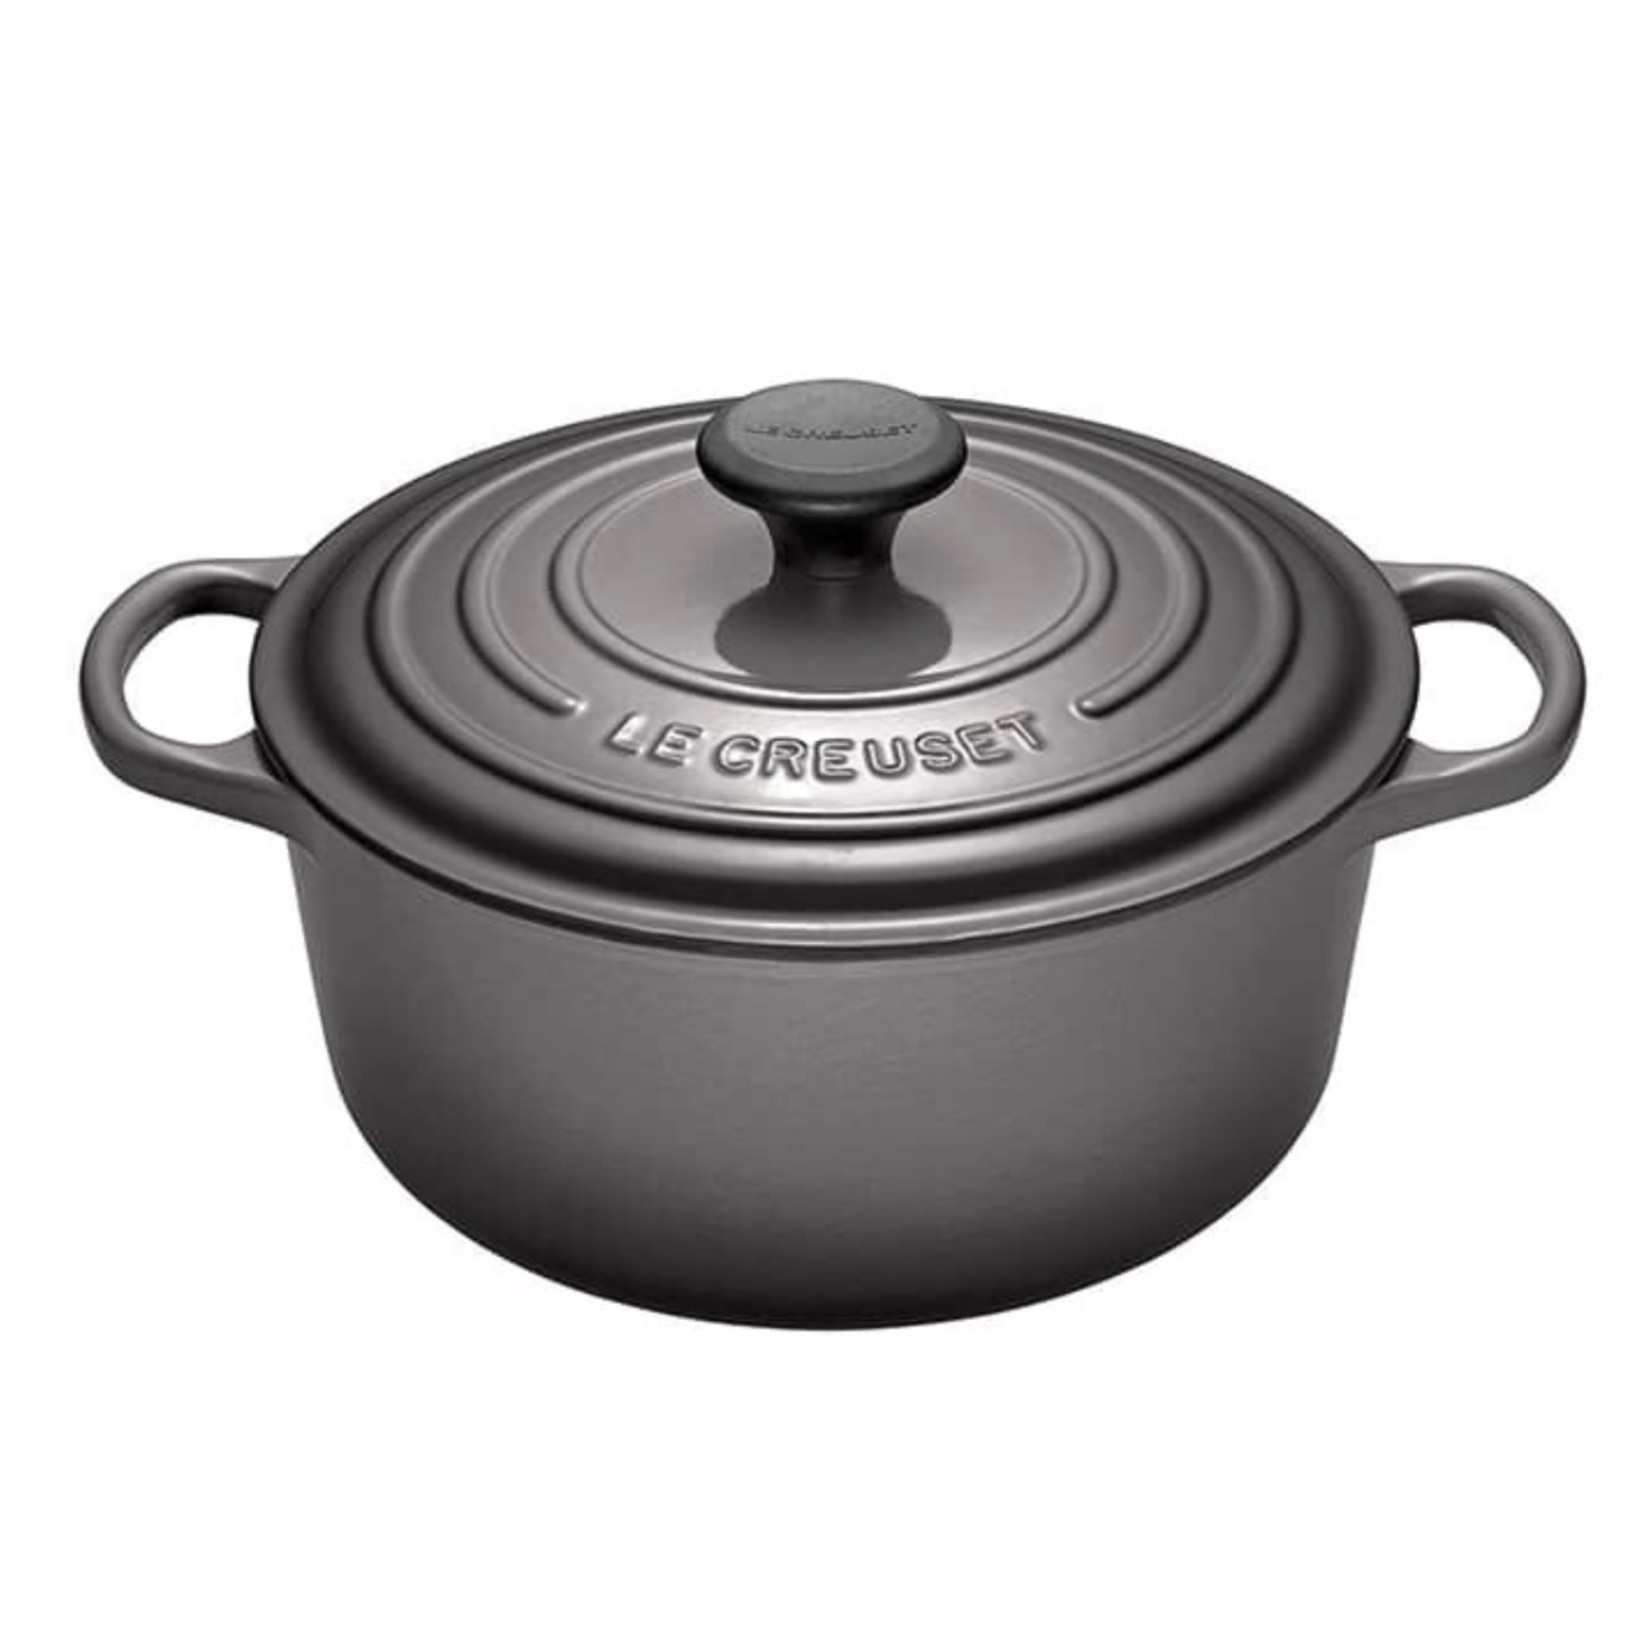 LE CREUSET LE CREUSET Round French Oven 3.3L